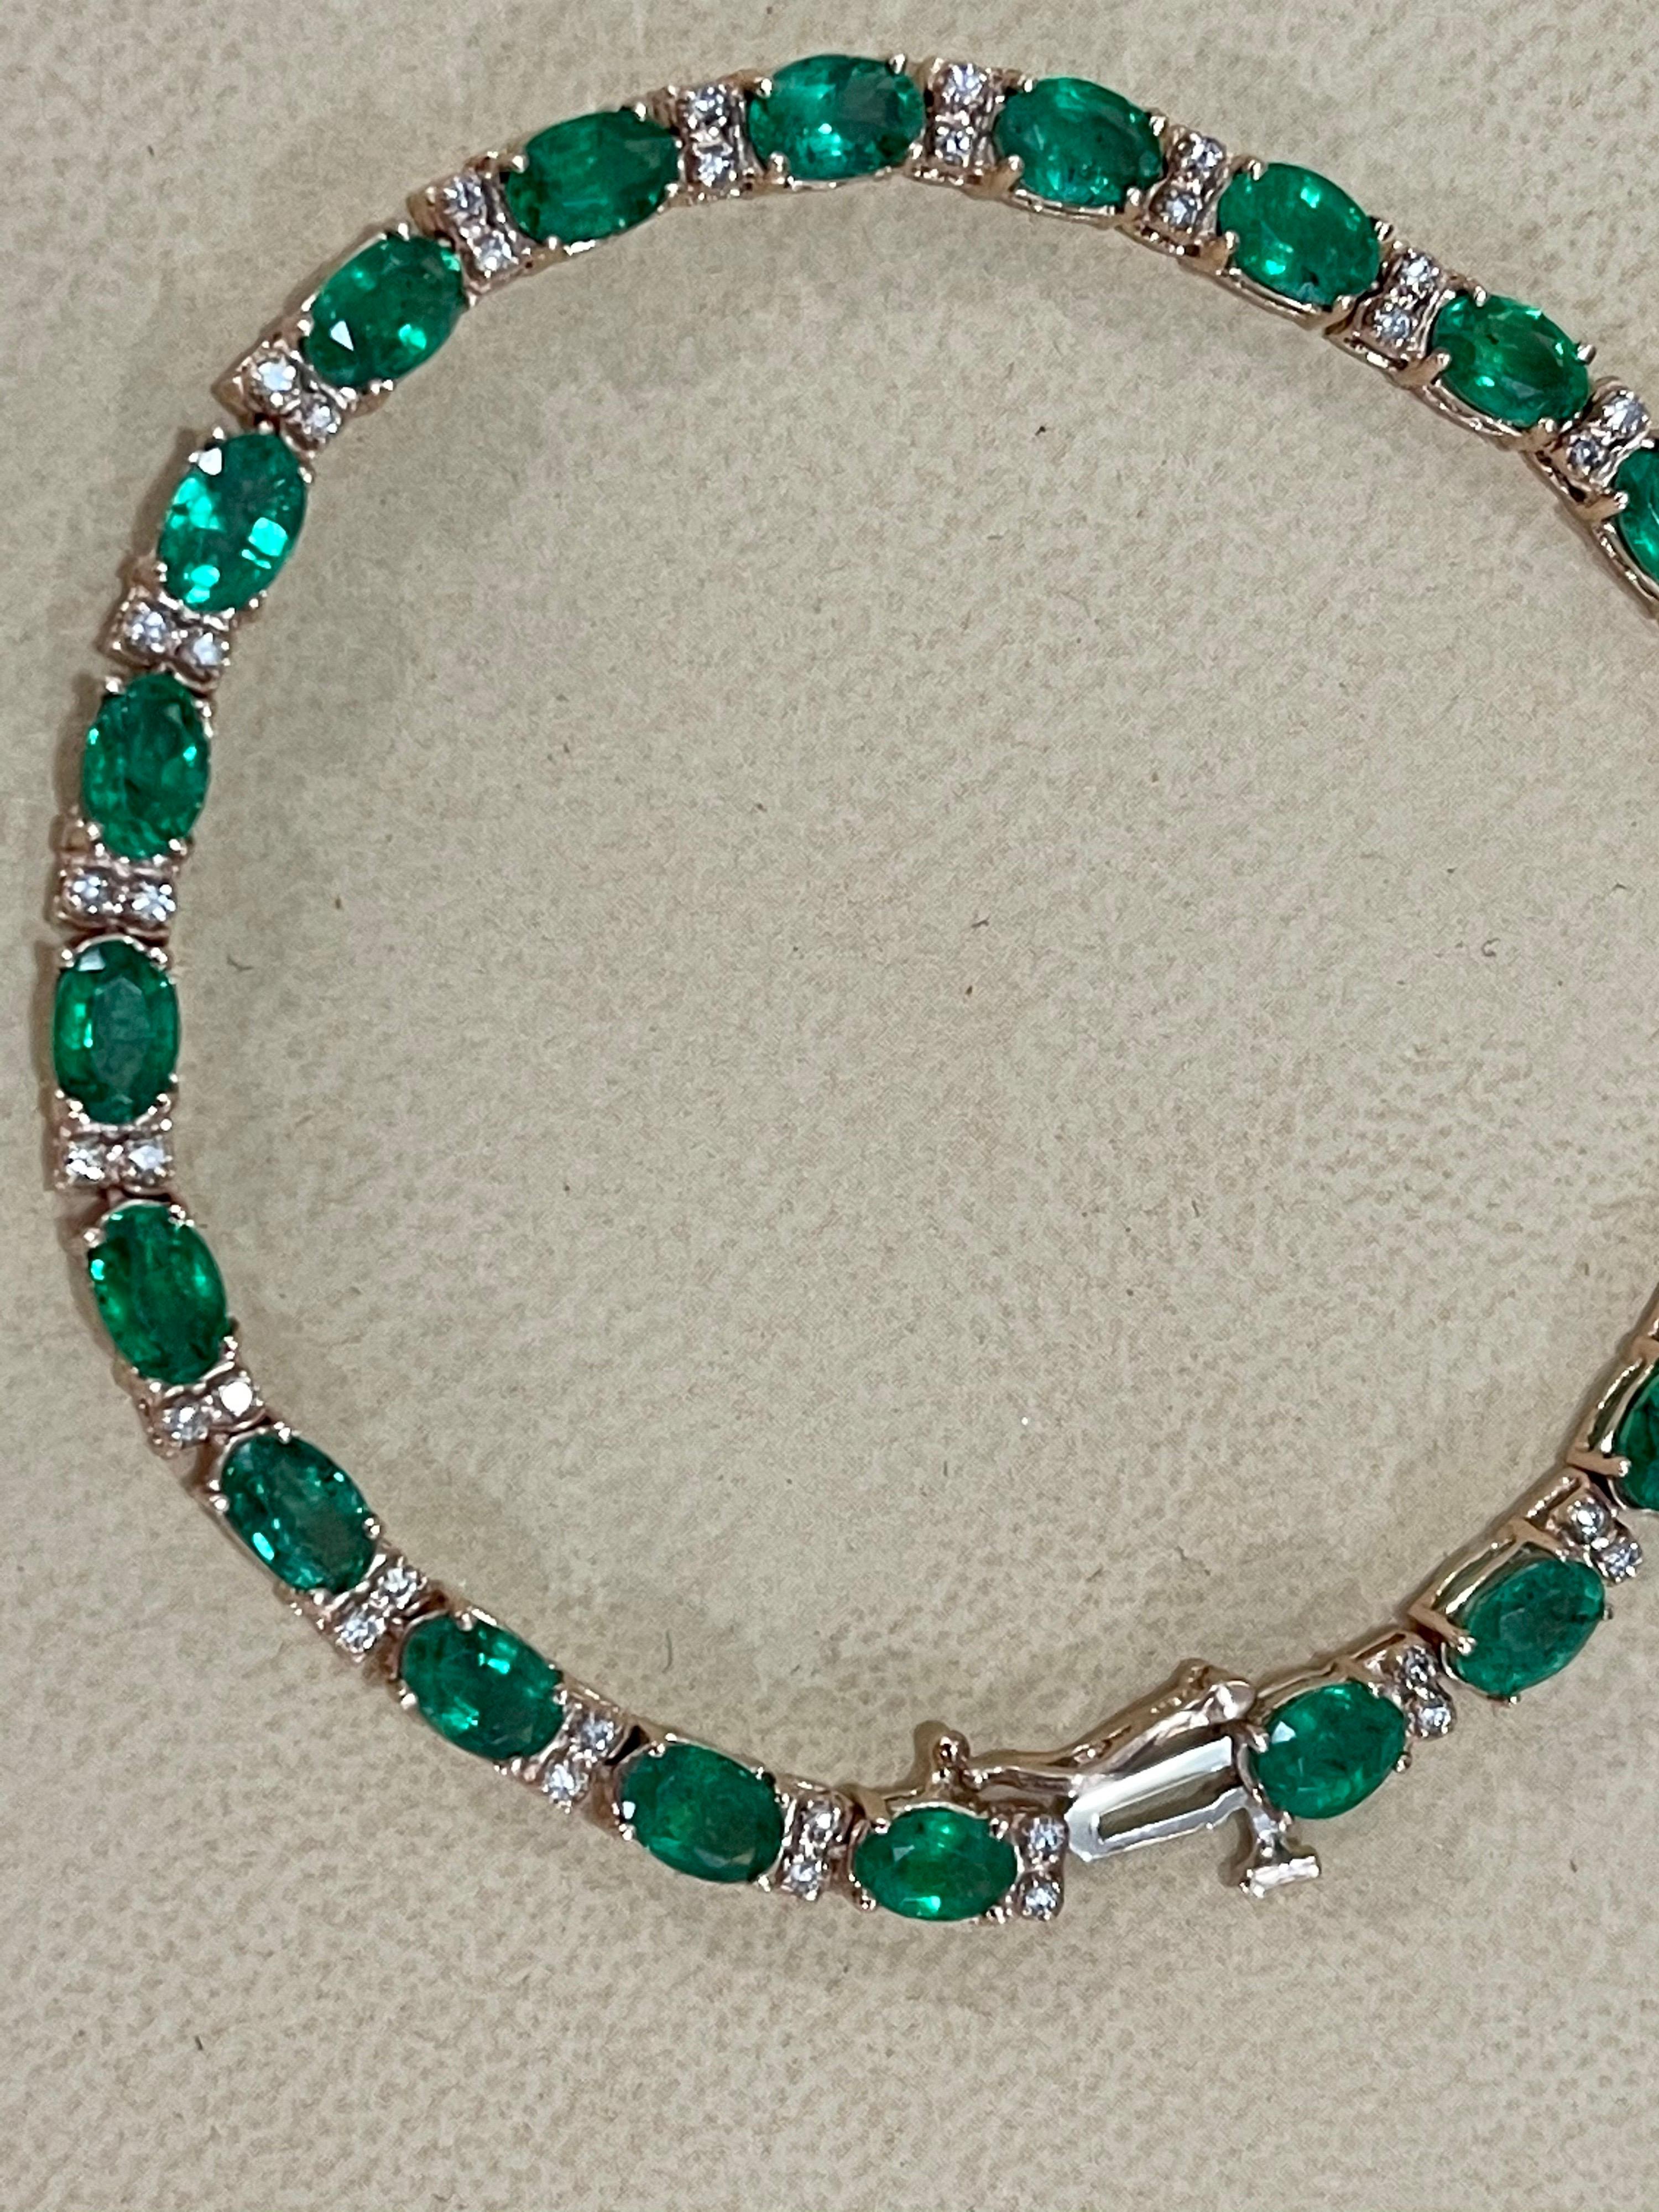 9 Ct Natural Brazilian Emerald and Diamond Tennis Bracelet 14 Karat Yellow Gold In New Condition For Sale In New York, NY